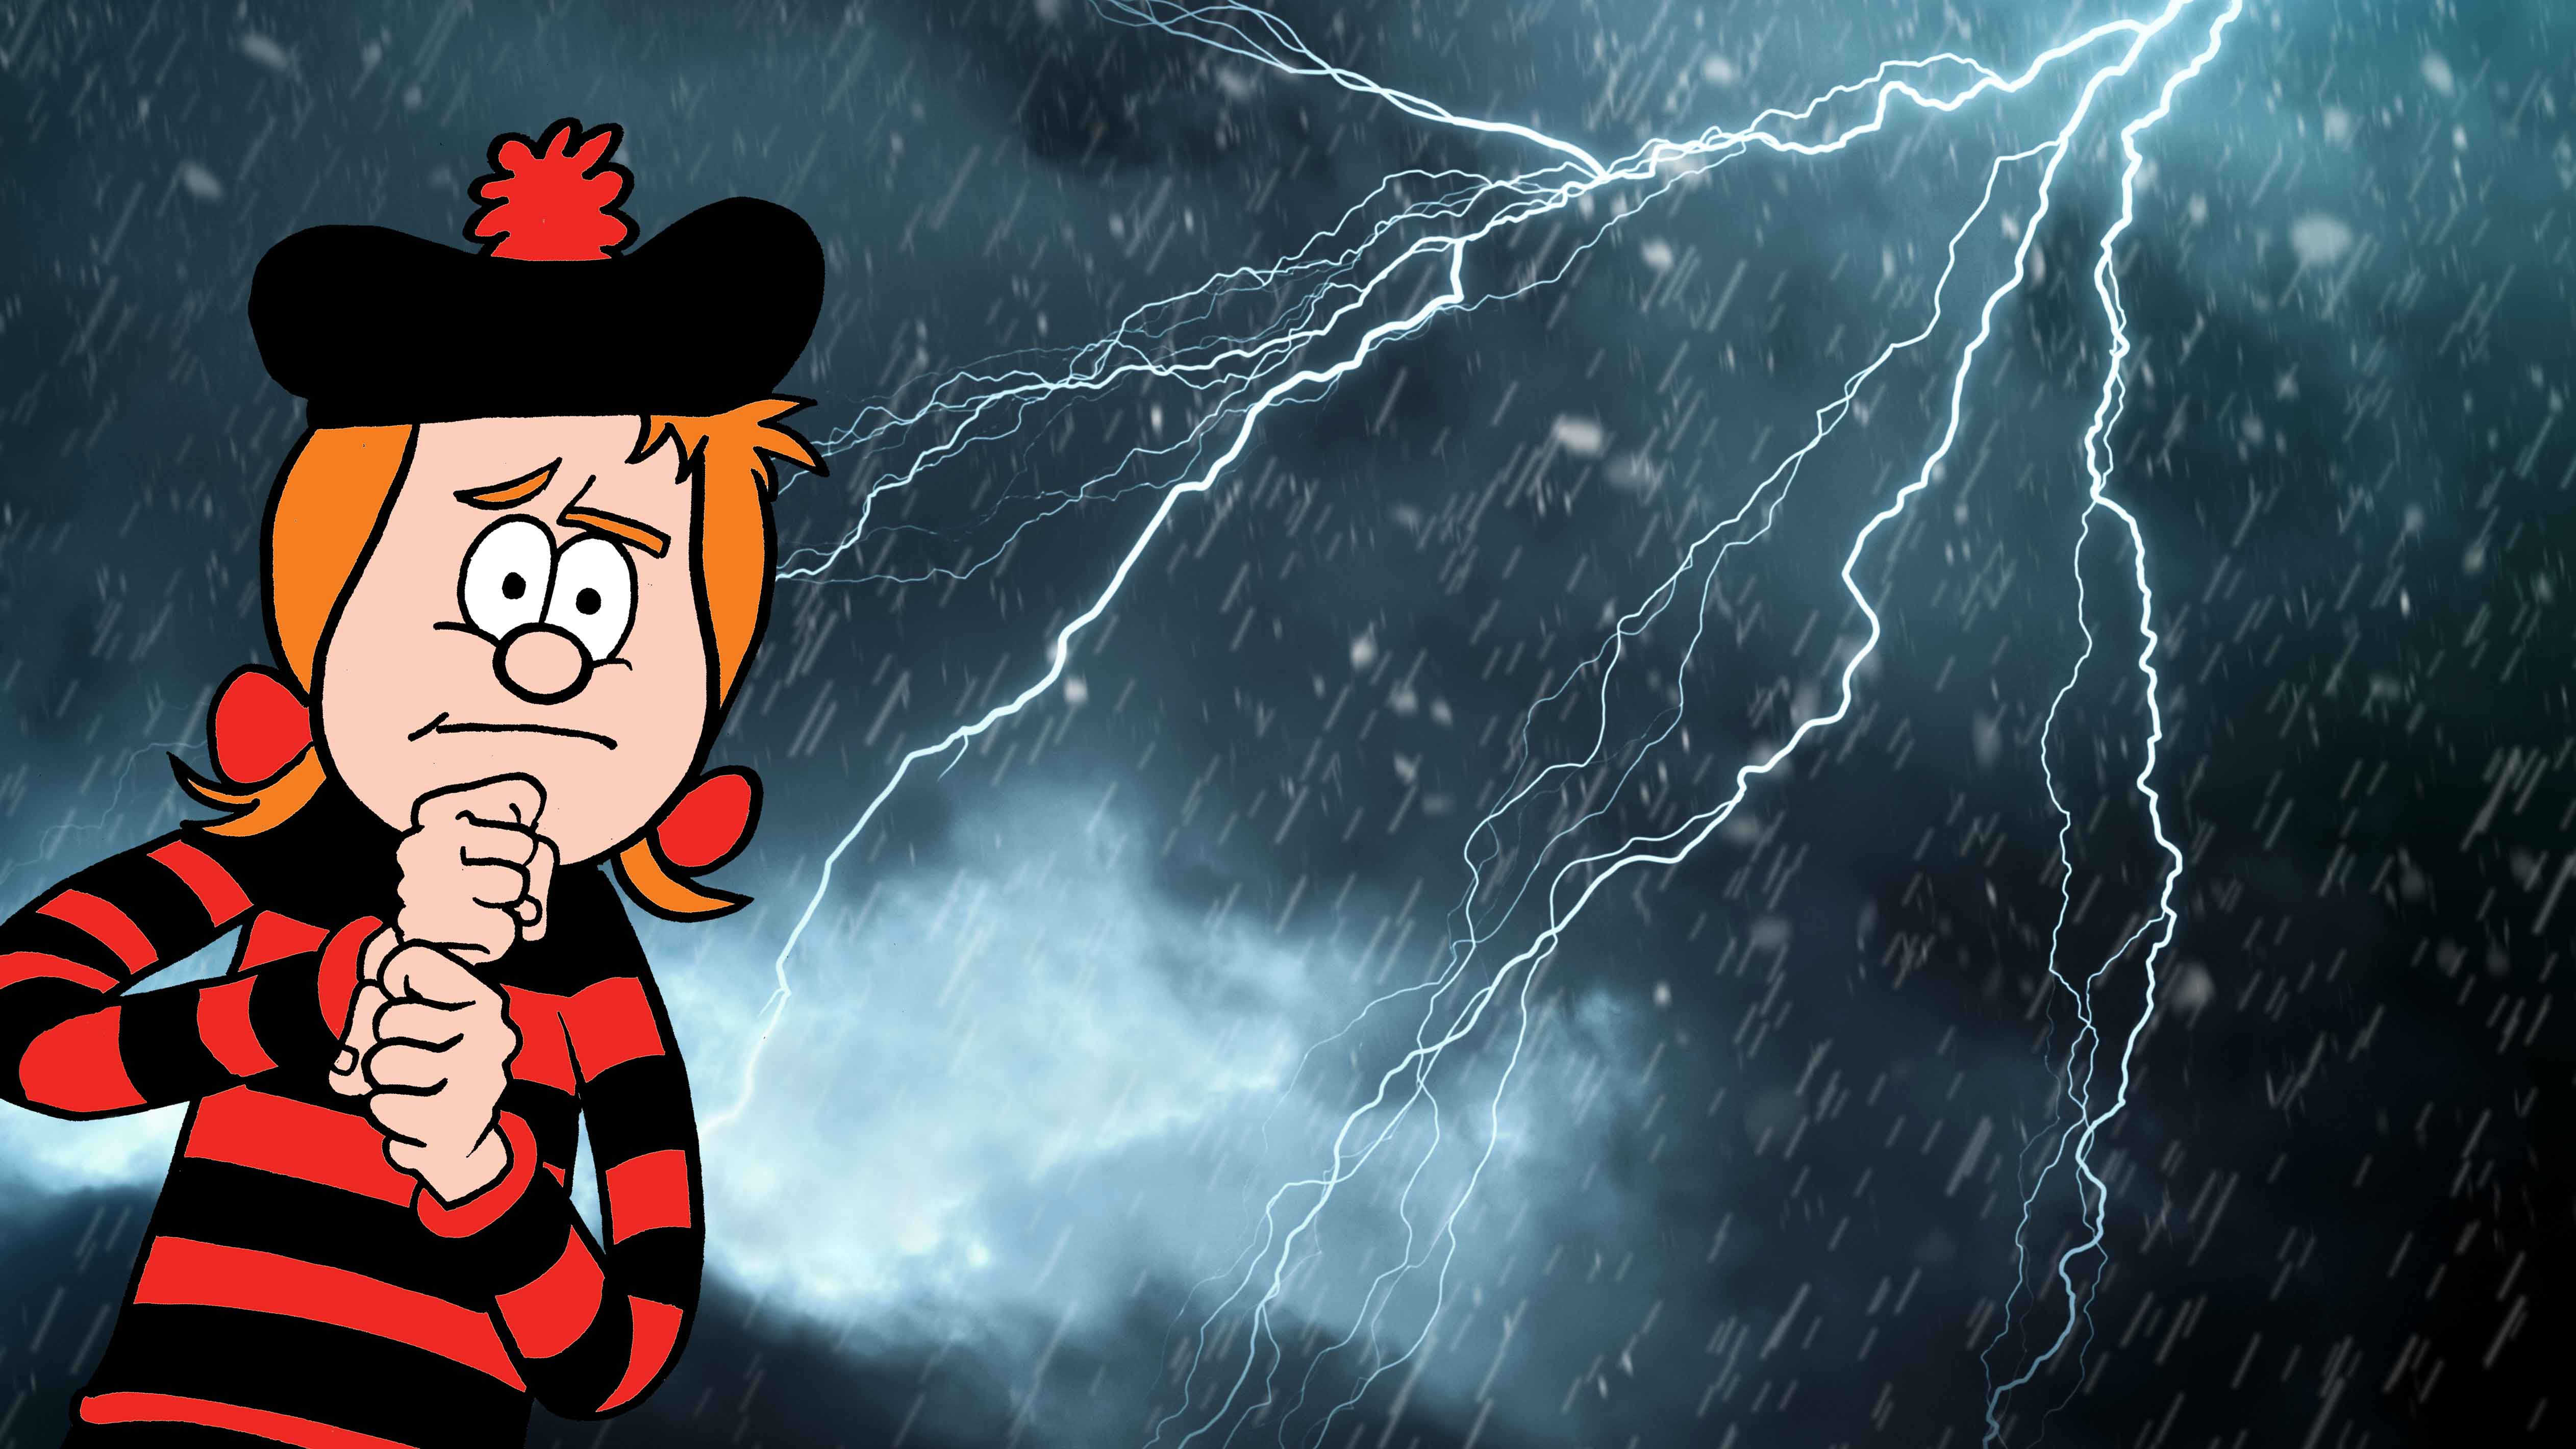 Minnie and a bolt of lightning